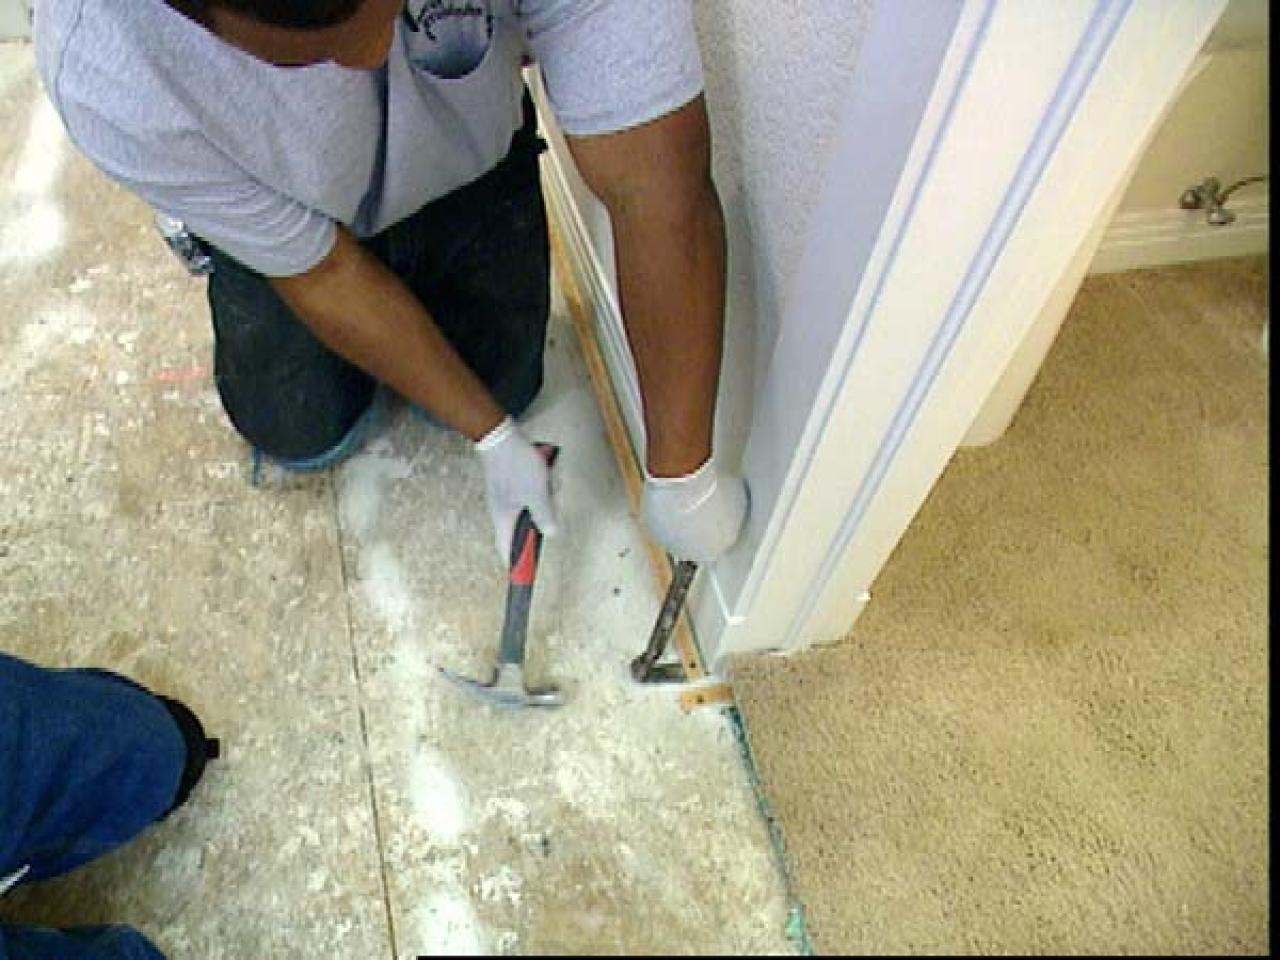 How To Install Tile Flooring Tos, Replace Tile Floor